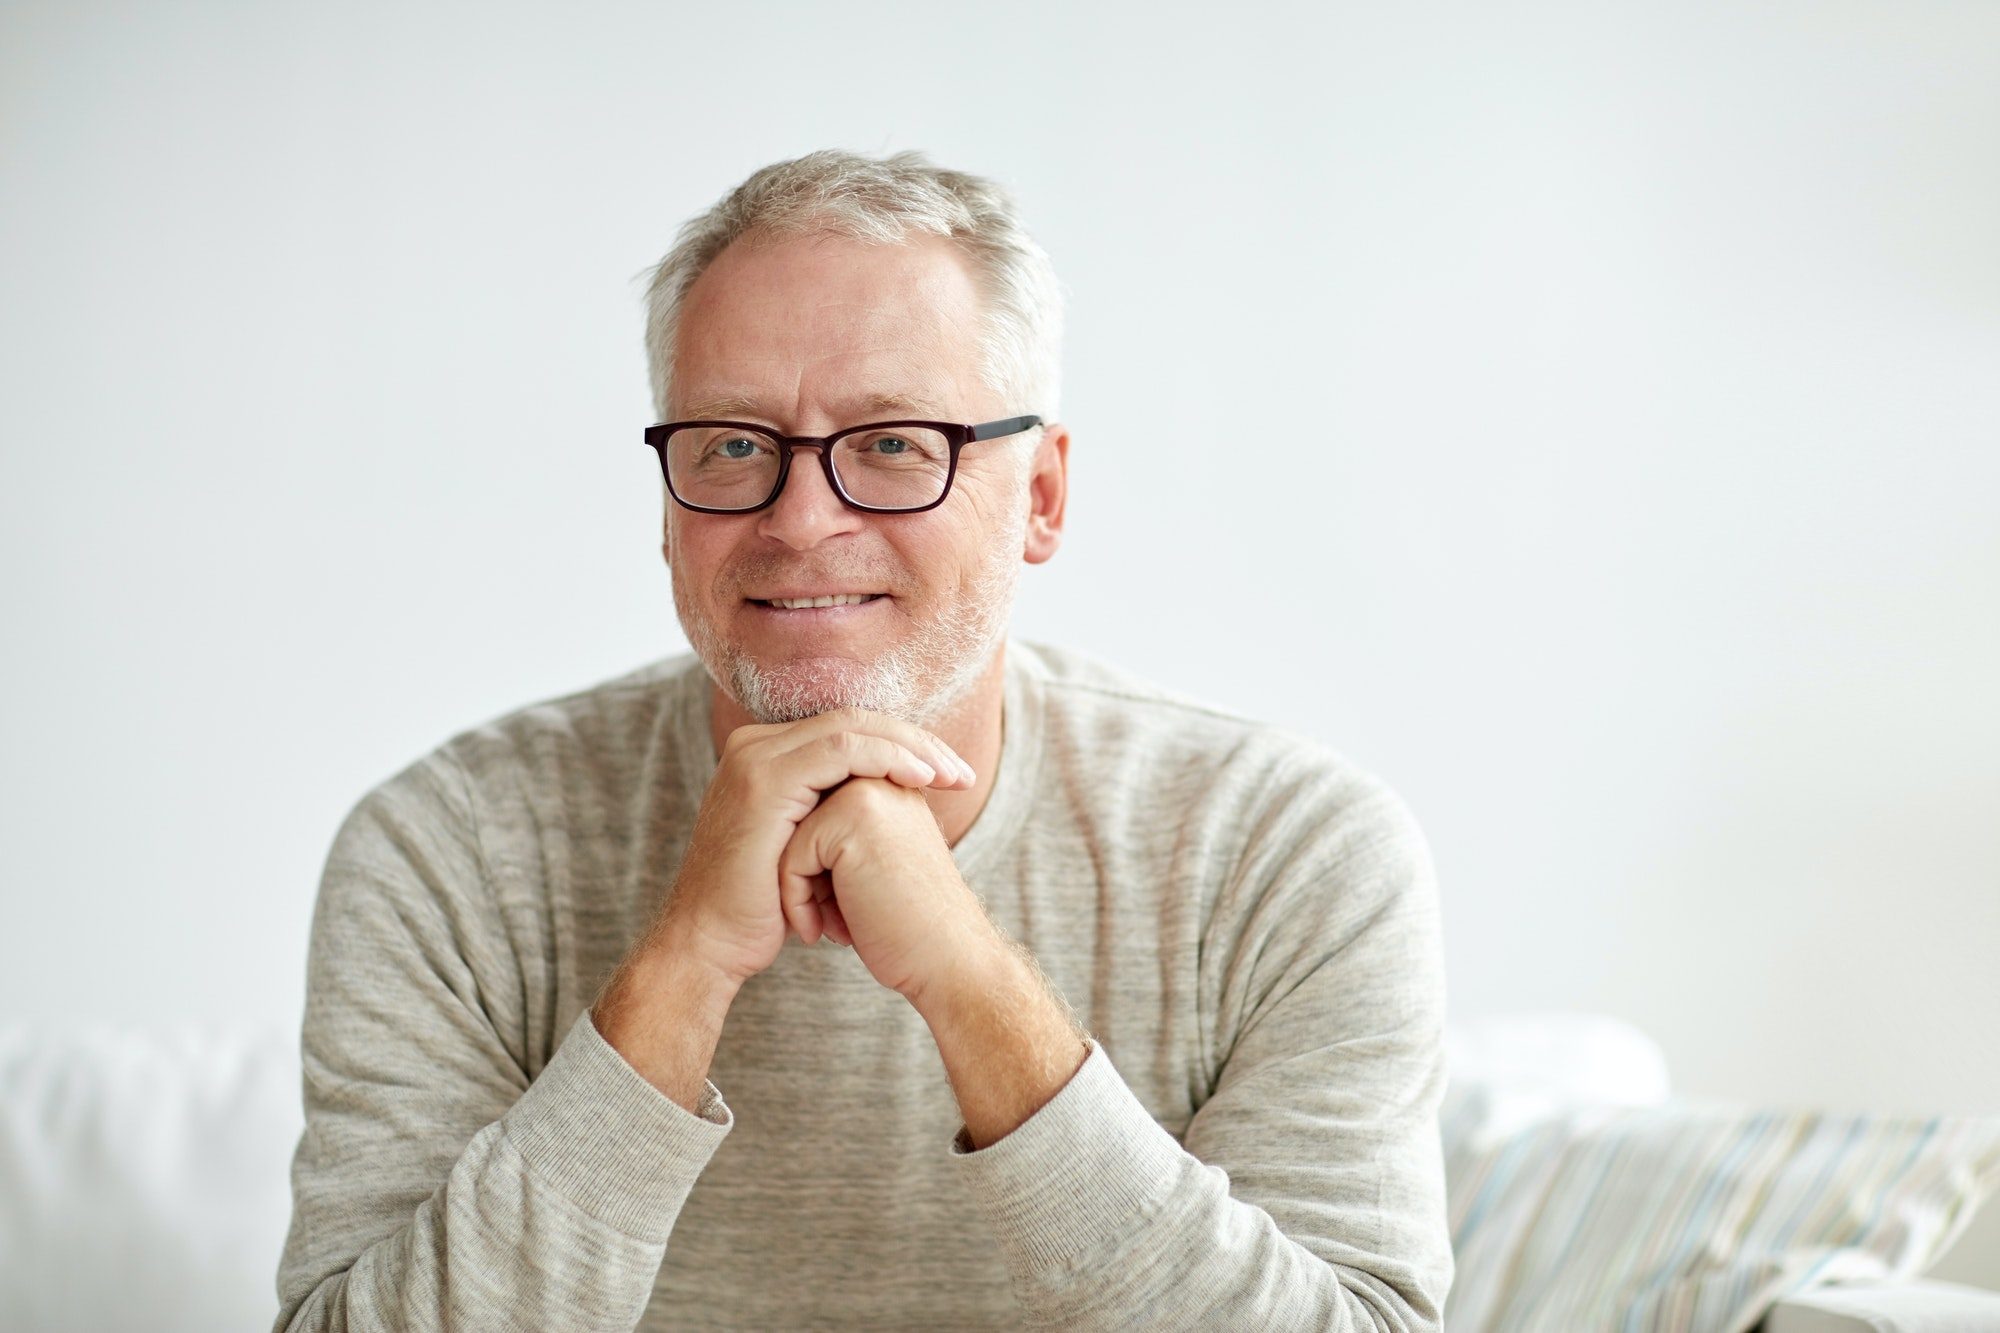 Smiling senior man in glasses sitting on sofa with Vision Benefits